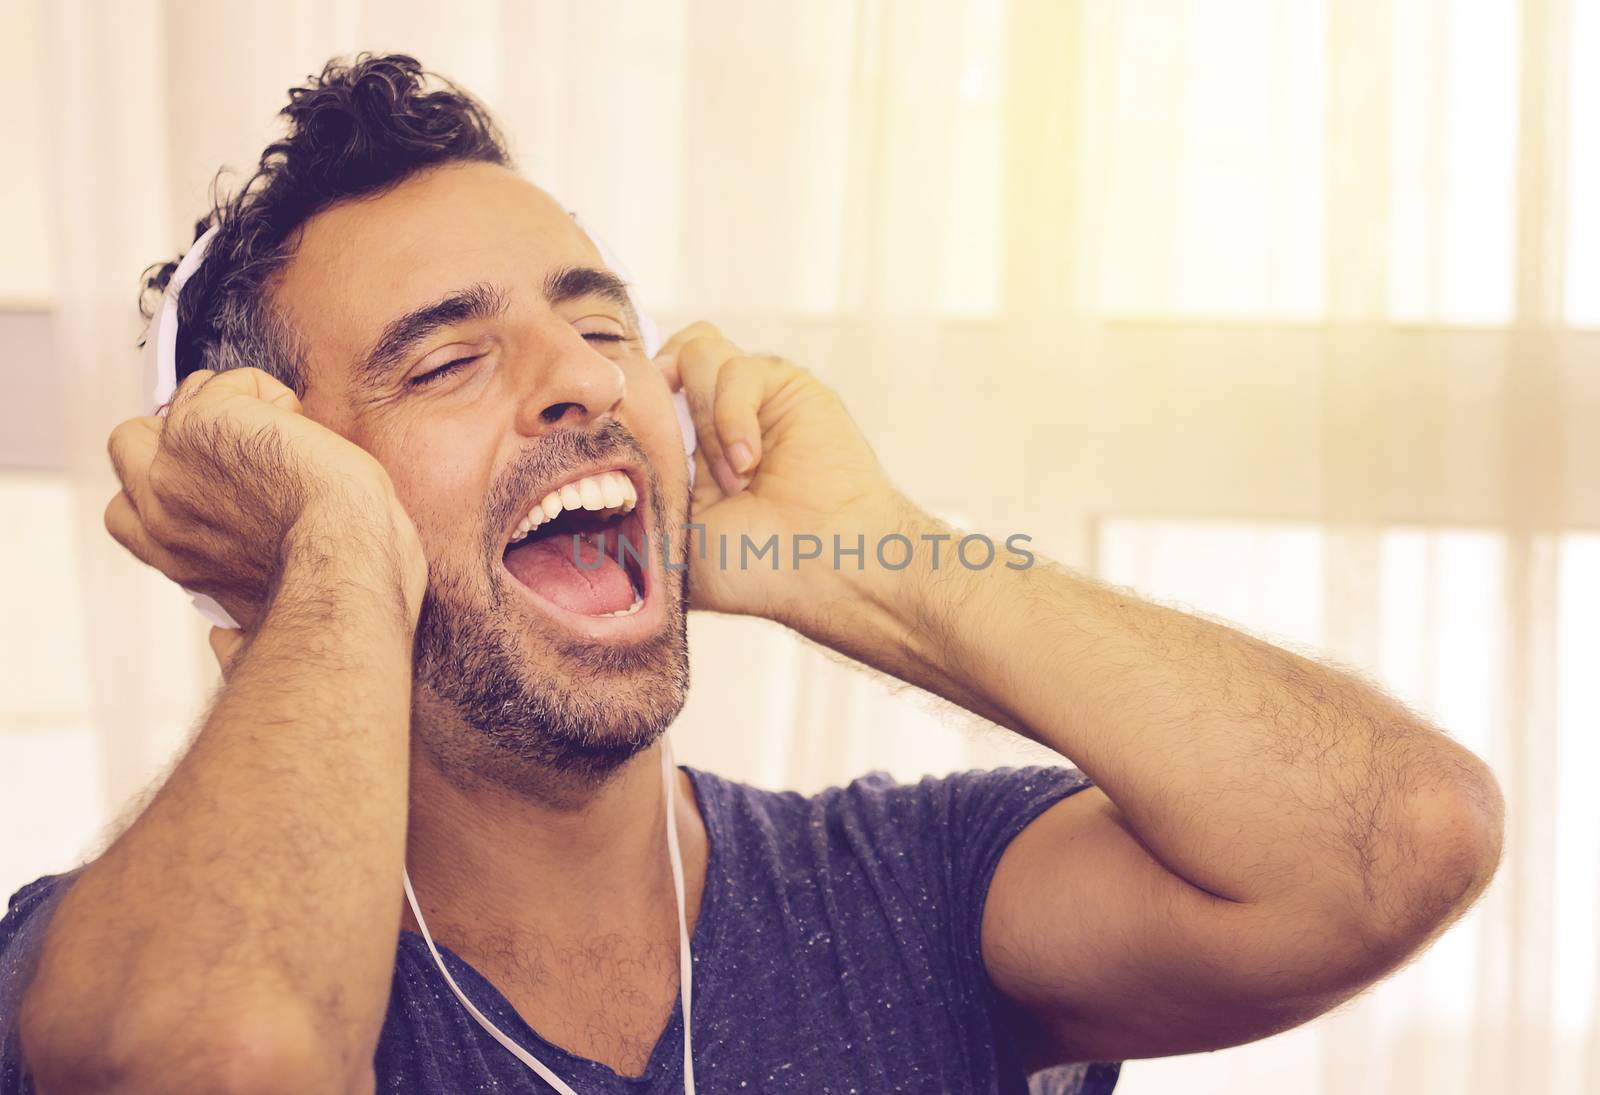 Exuberant handsome young man listening to his music cheering and singing along to the lyric and beat as he listens to the soundtrack on his headphones